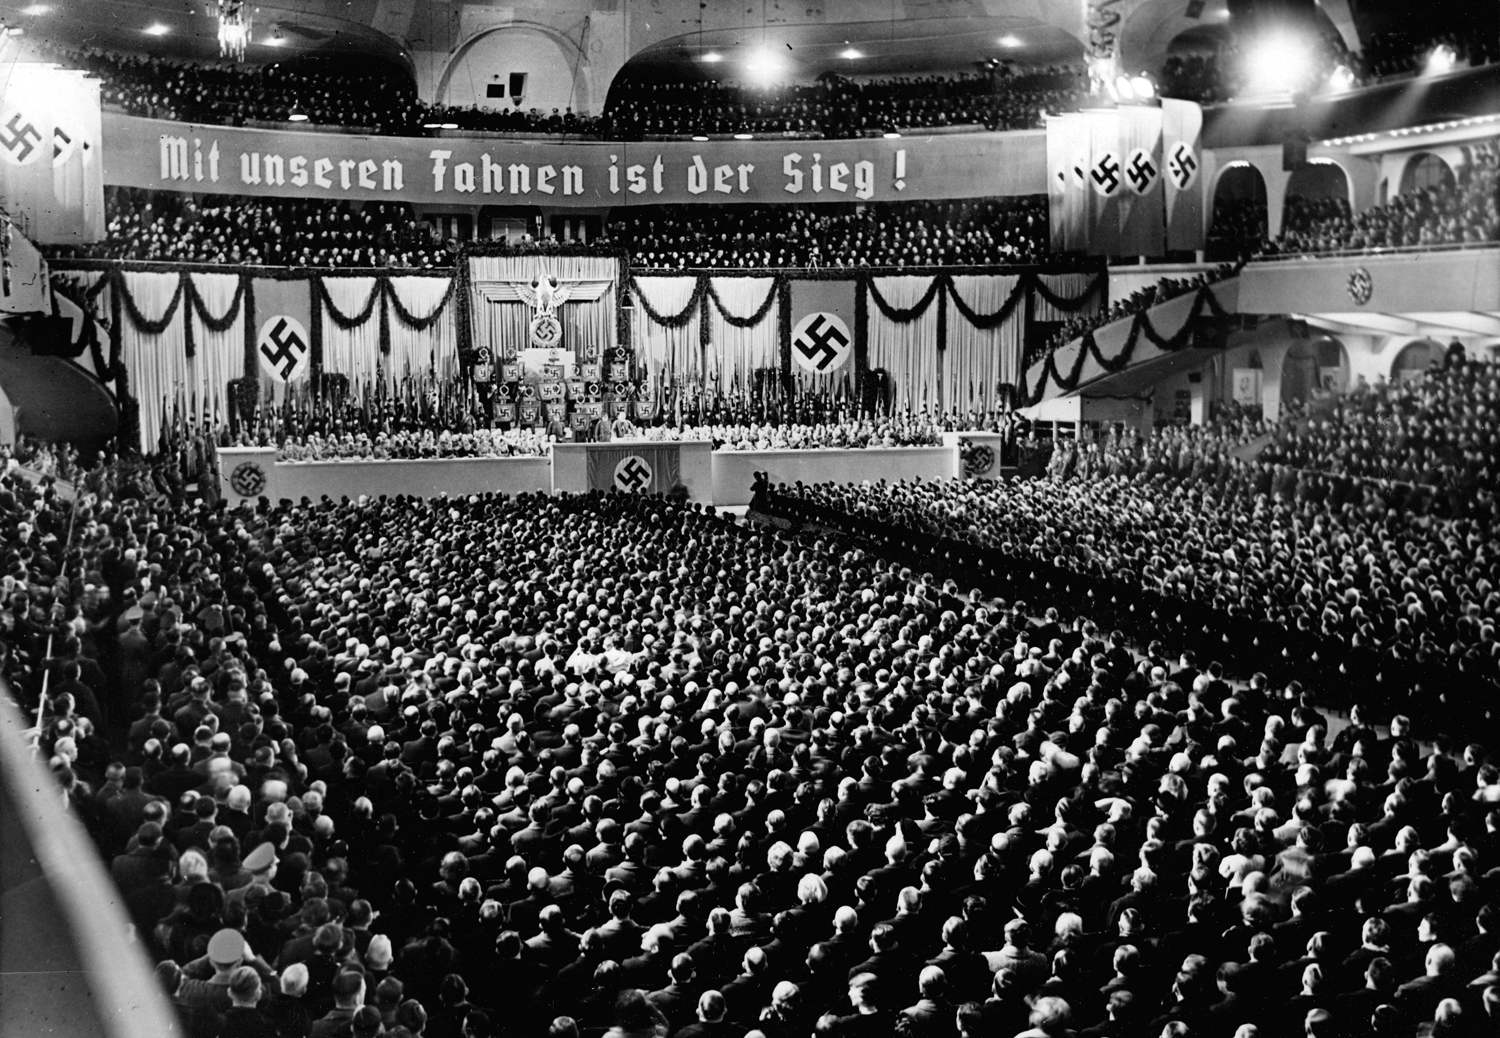 Adolf Hitler gives a speech in Berlin's Sportpalast for the anniversary of the Machtergreifung